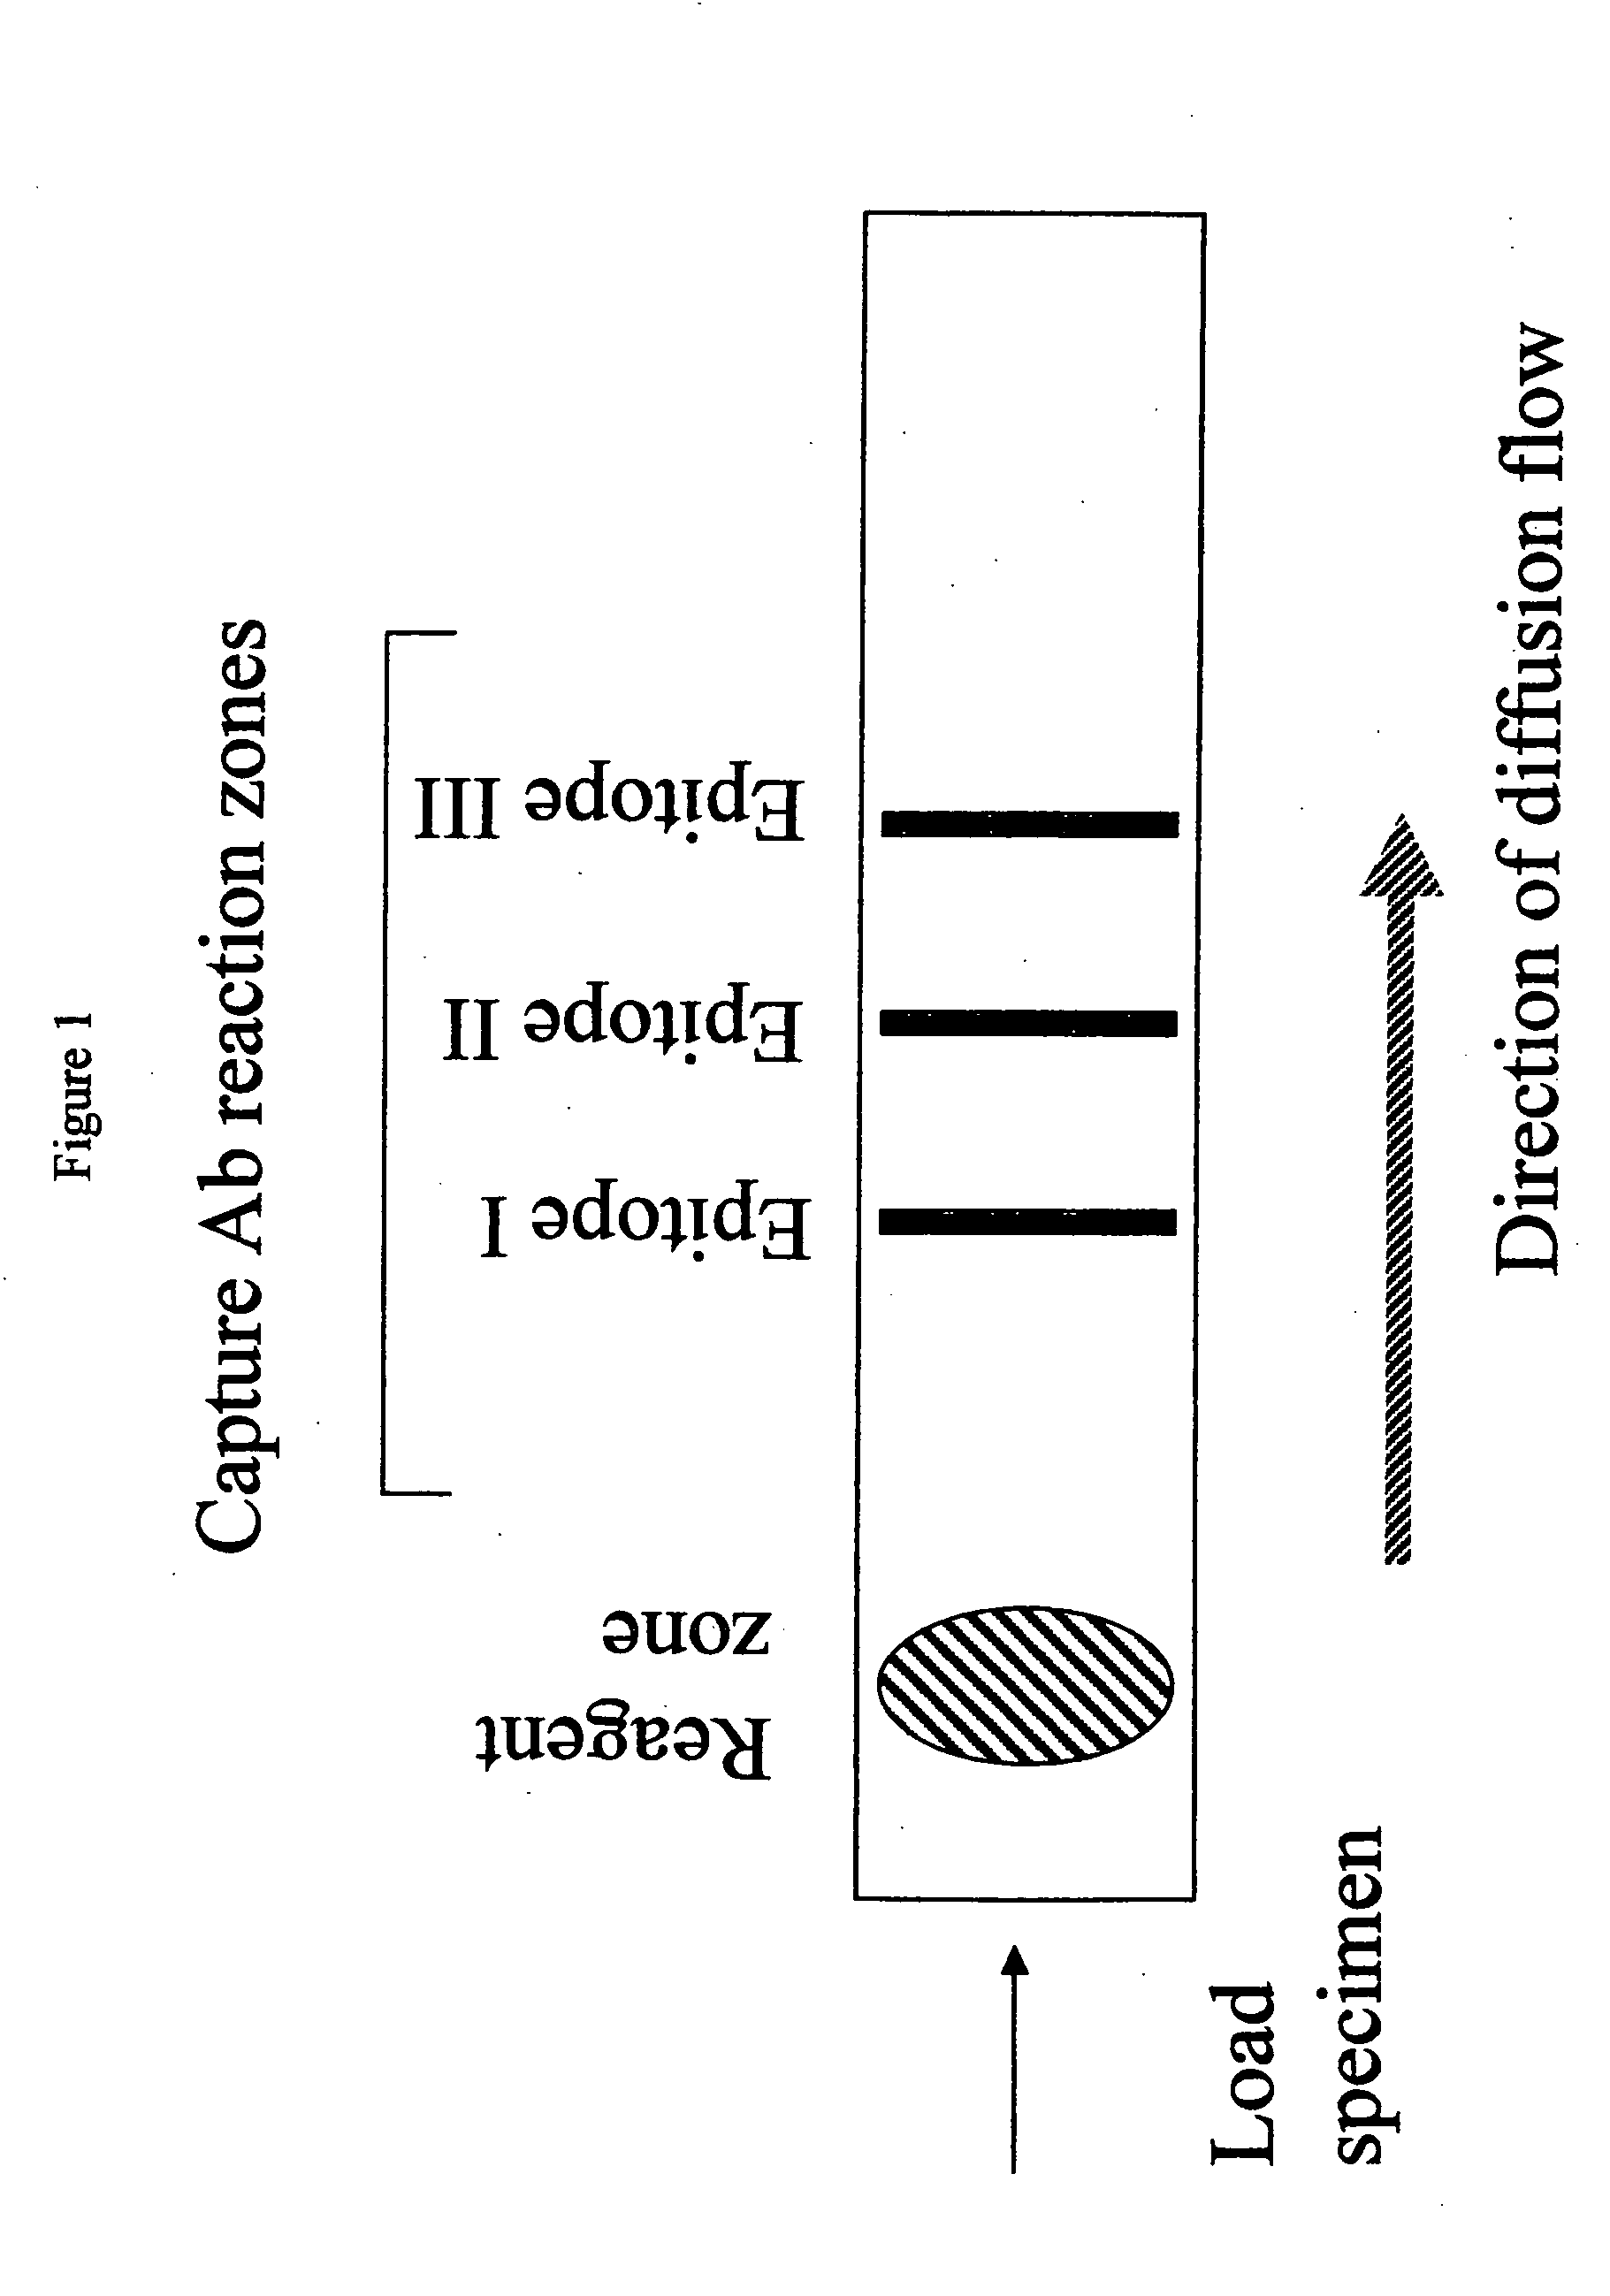 Methods and device for detecting prostate specific antigen (PSA)